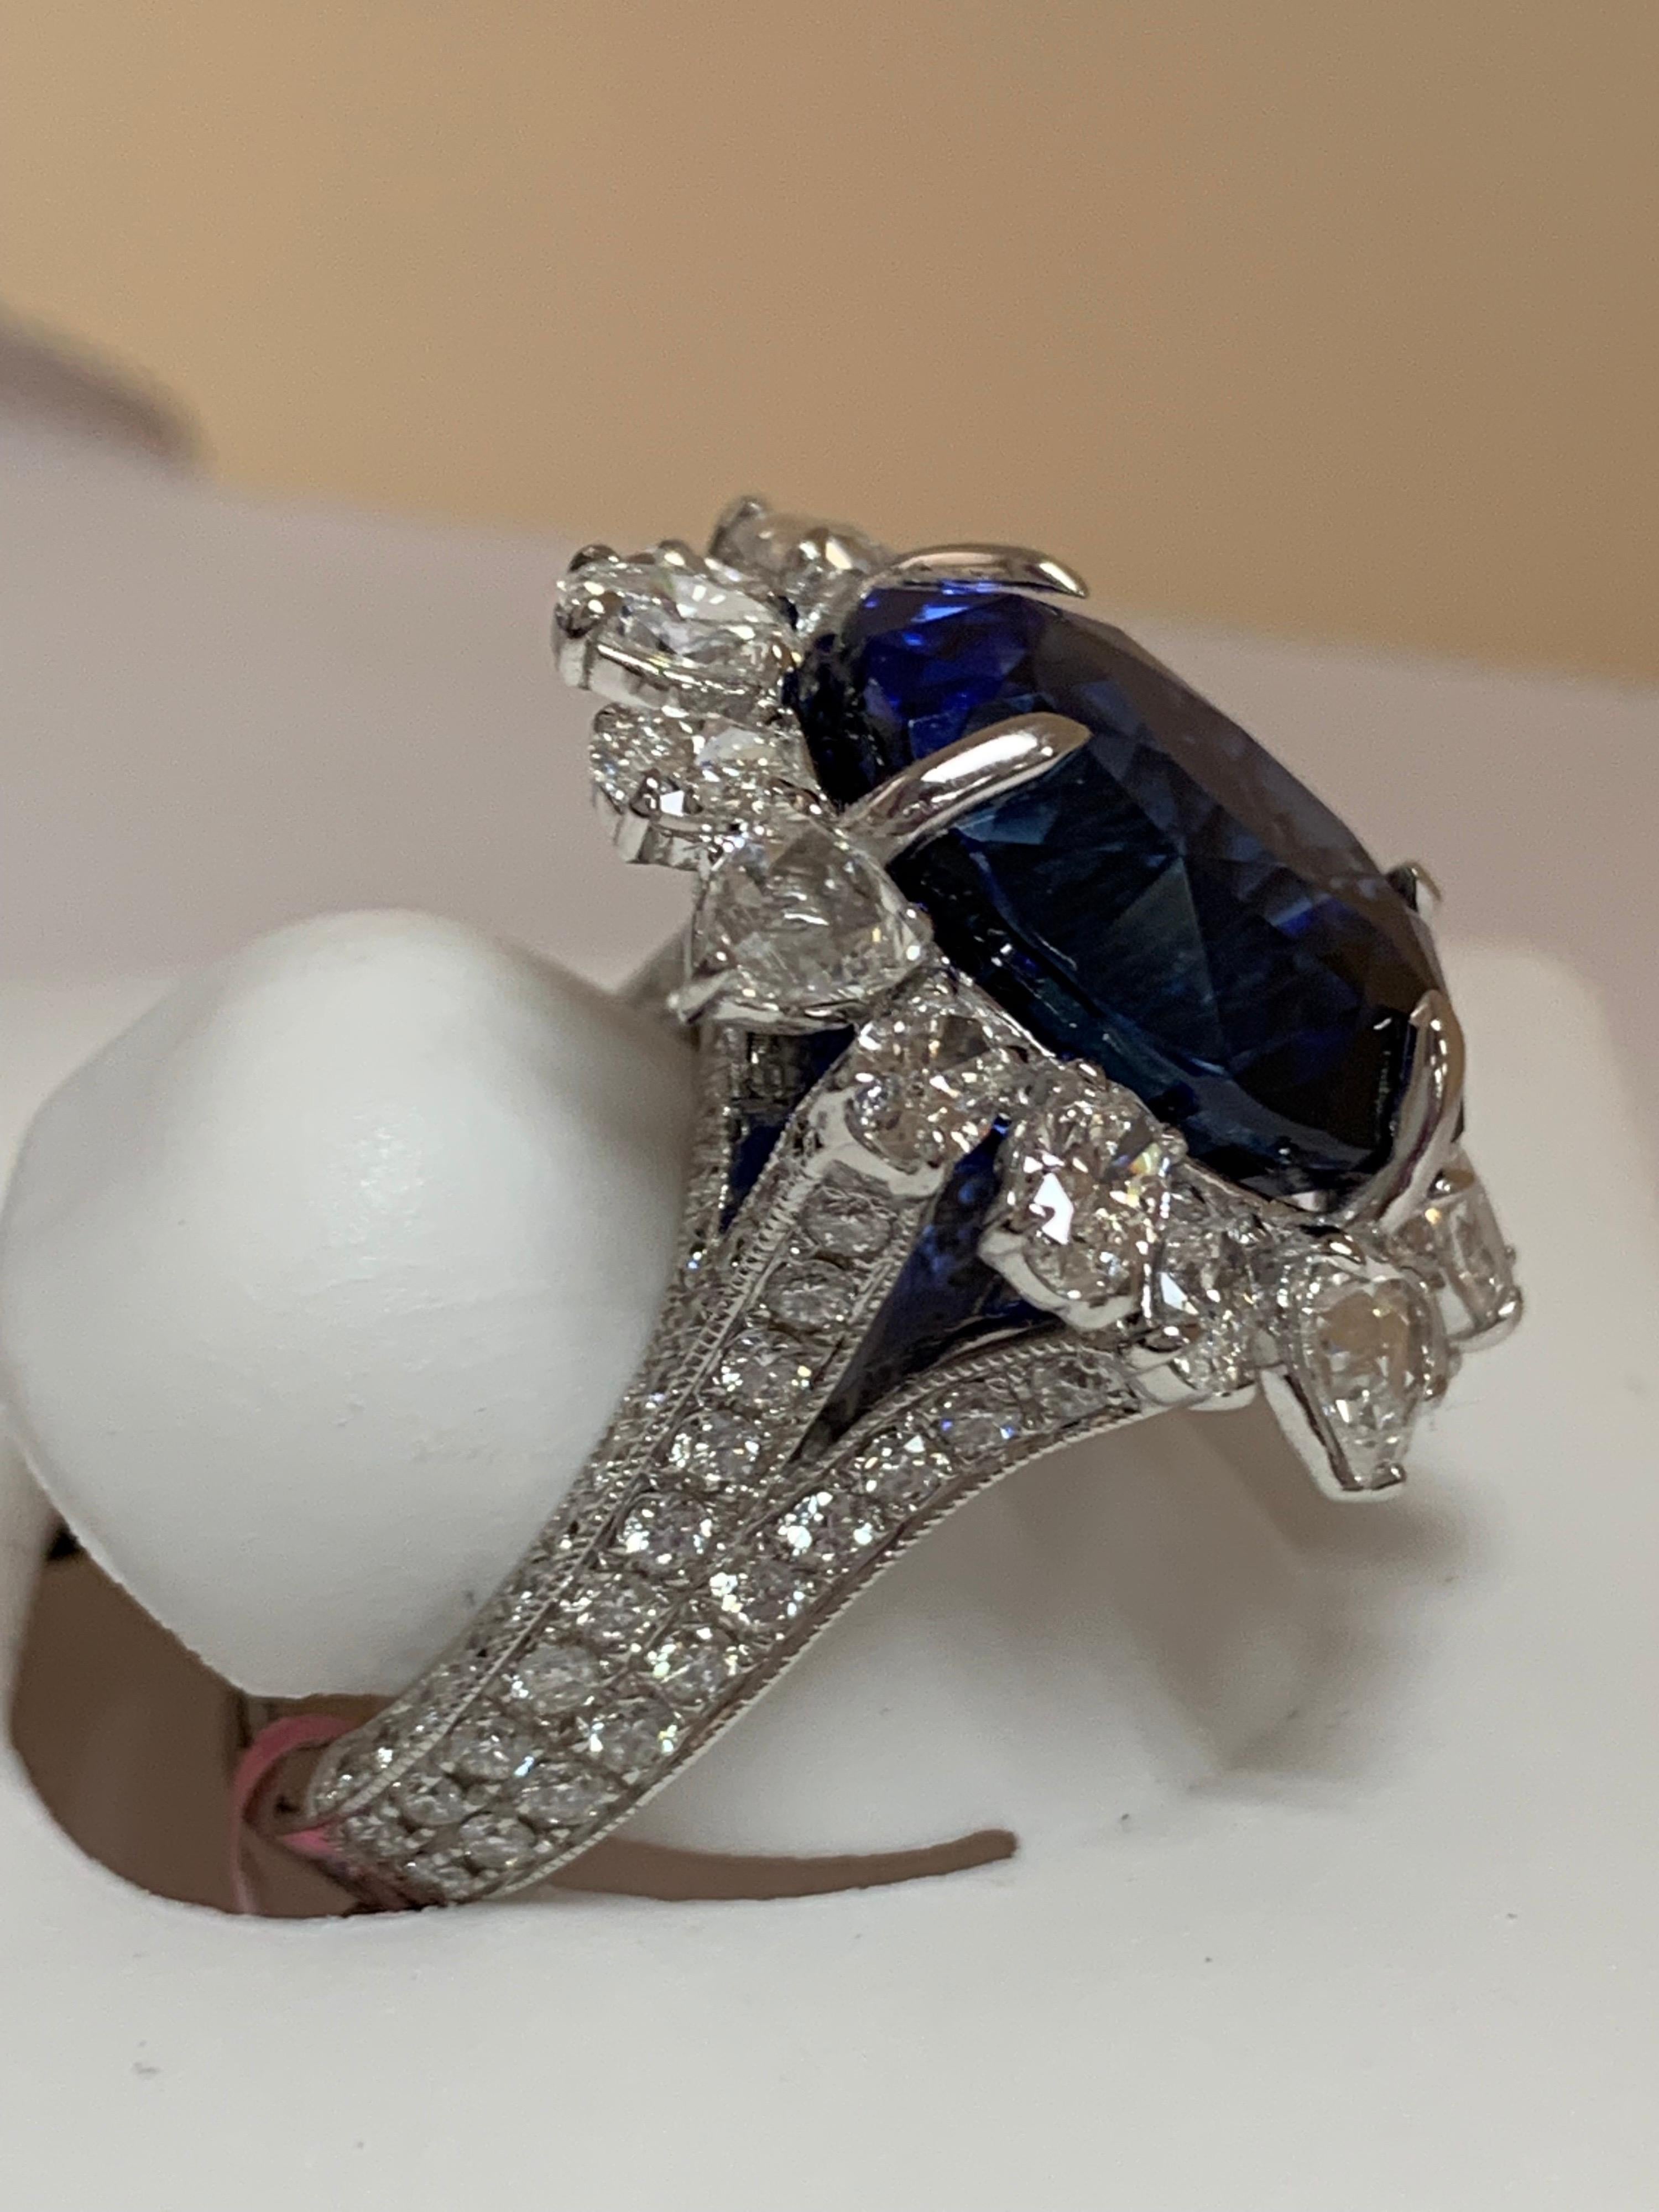 Natural 20.08 Carat GIA Certified Royal Blue Sapphire and 5.05 Carat white diamond set in 18 Karat white gold, The ring is one of a kind handcrafted.